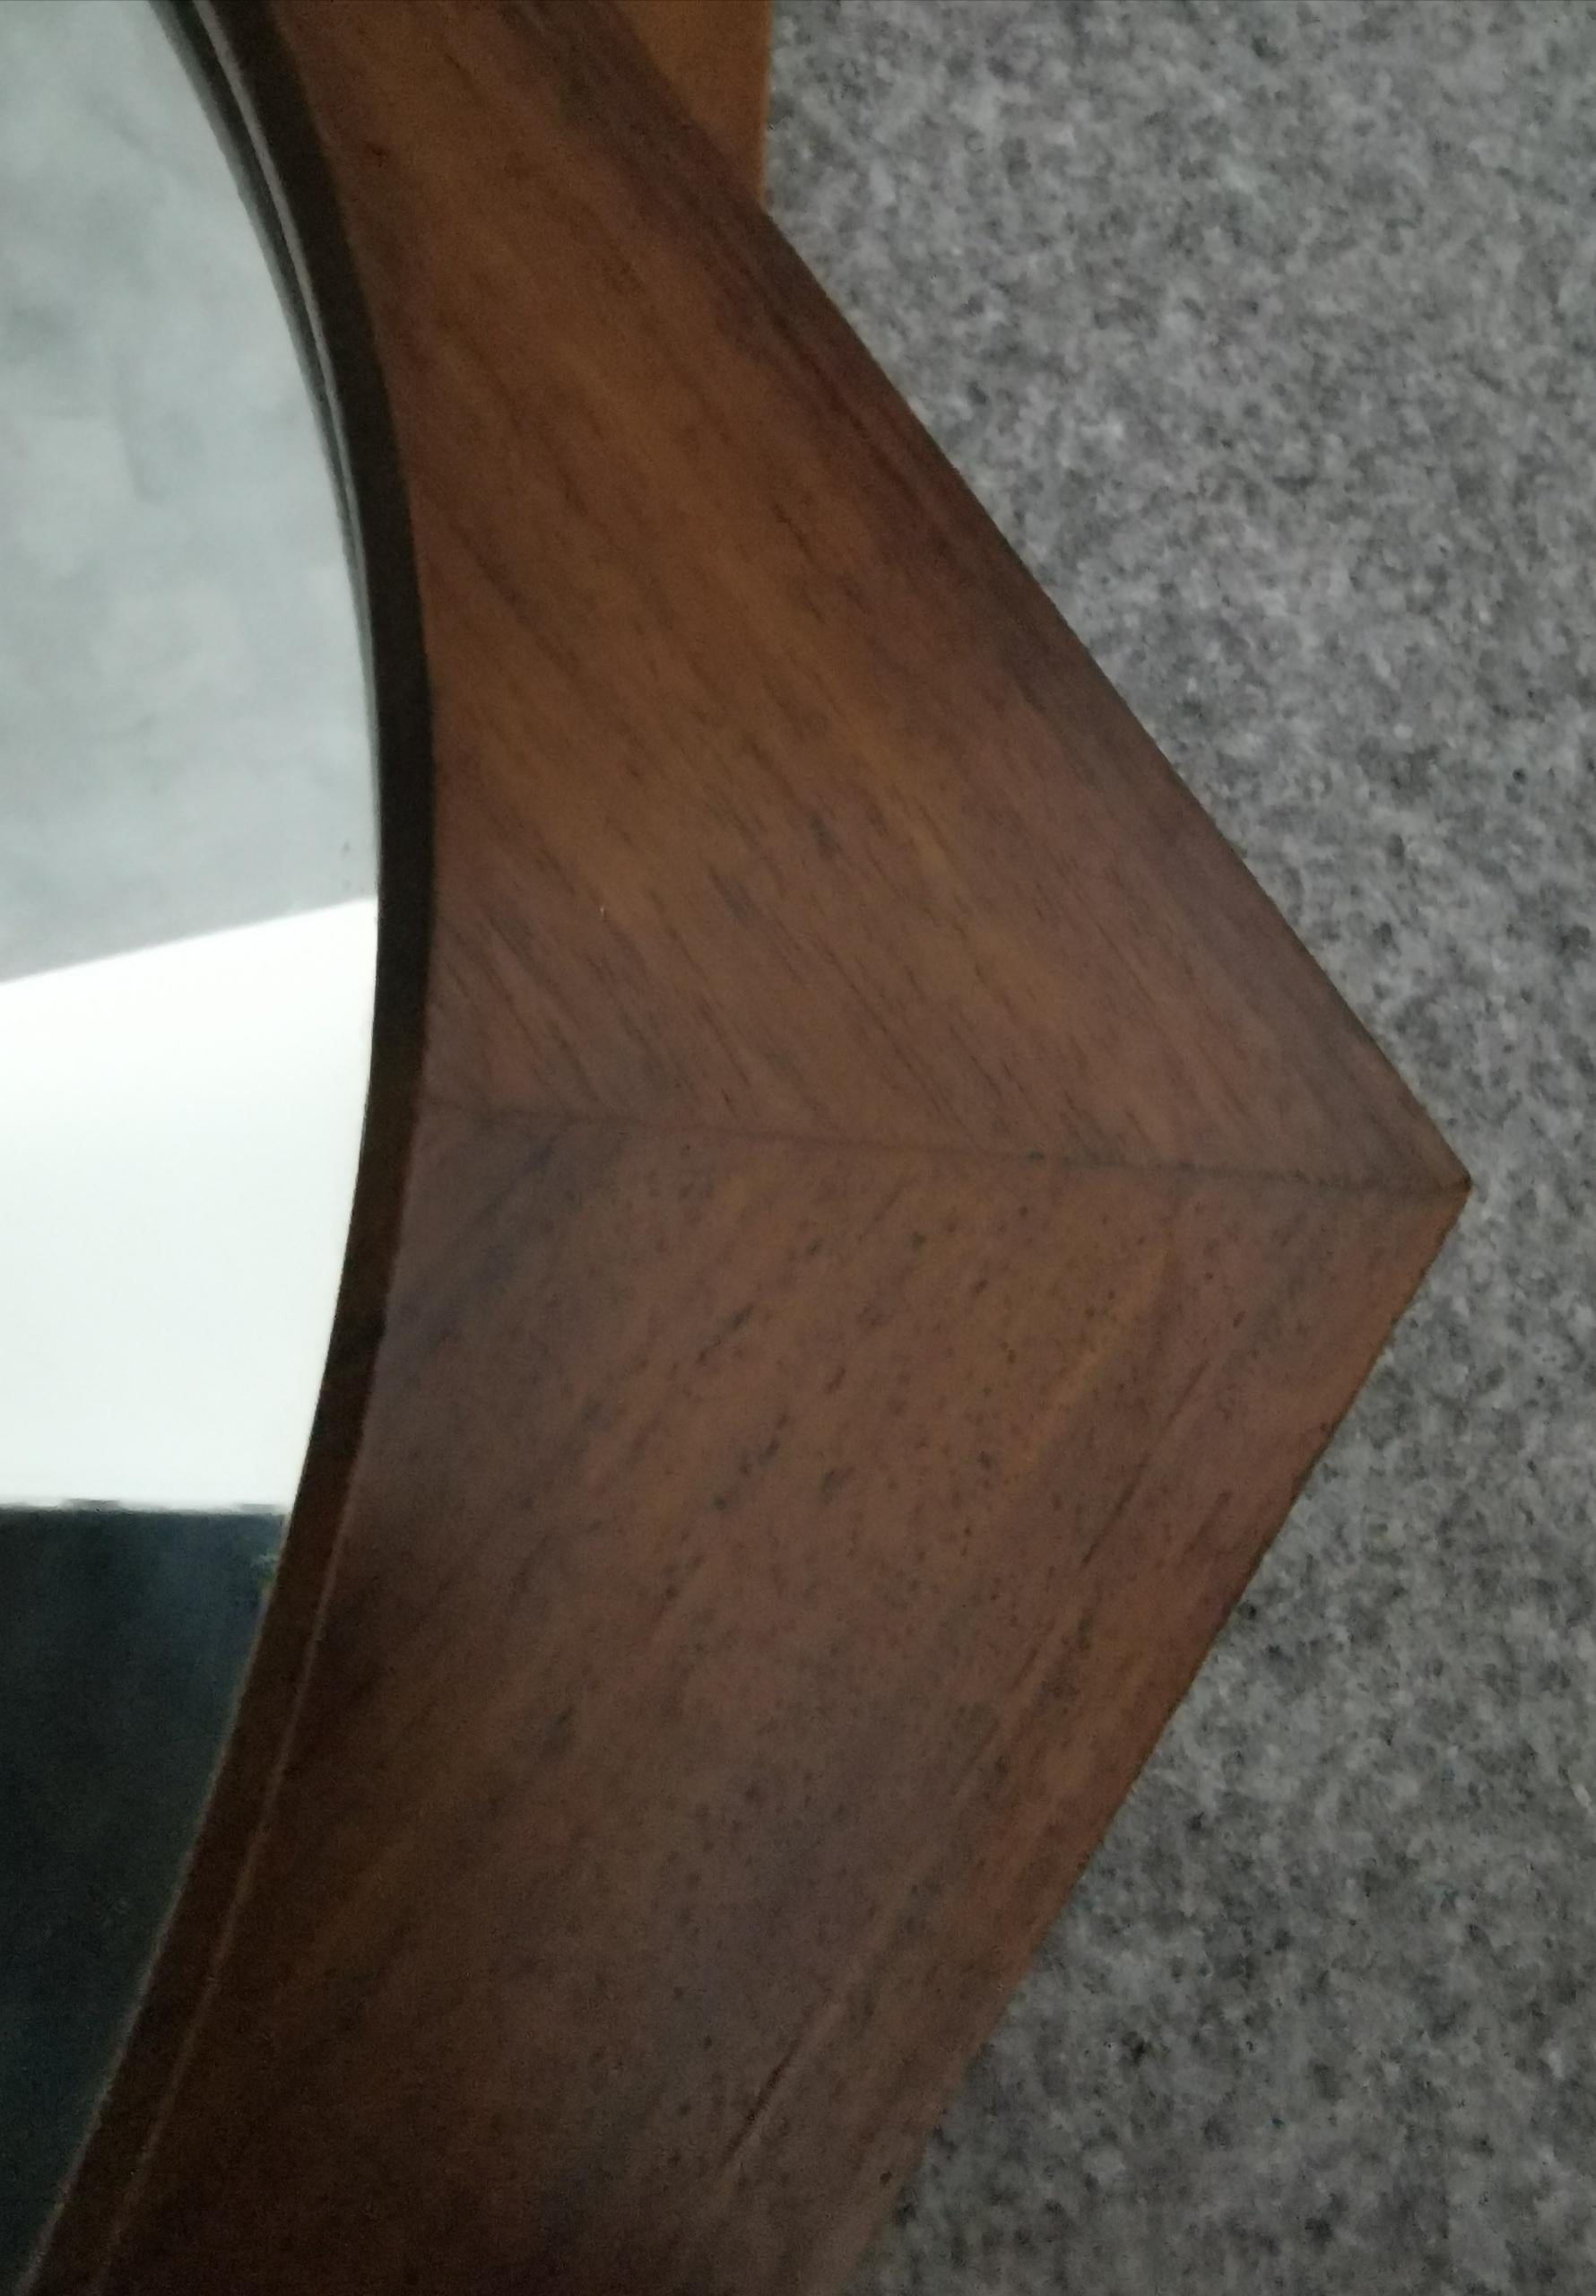 Late 20th Century Midcentury Mirror in Rosewood at 10-Pointed Star Shape, Italian Design, 1970s